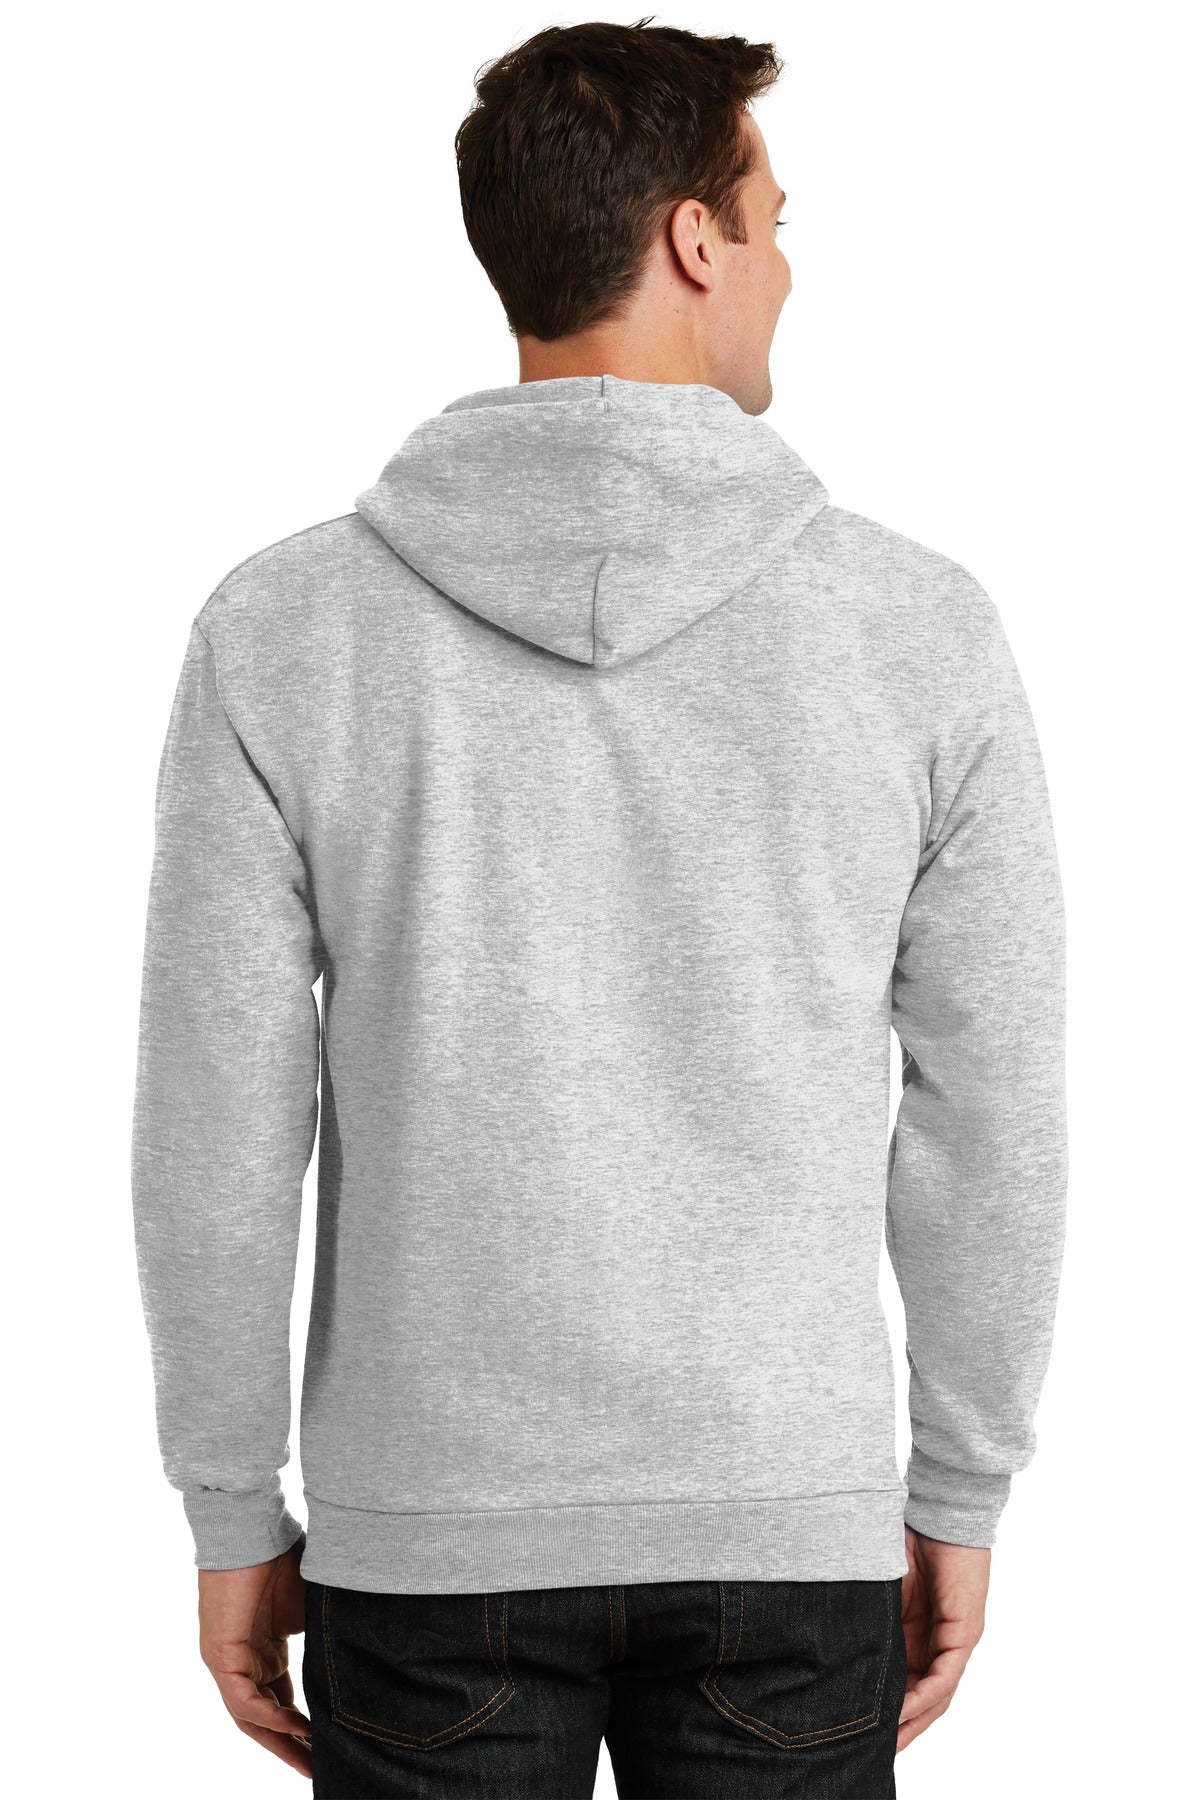 Port & Company® -  Premium Full-Zip Hoodie with Embroidery.  PC90ZH